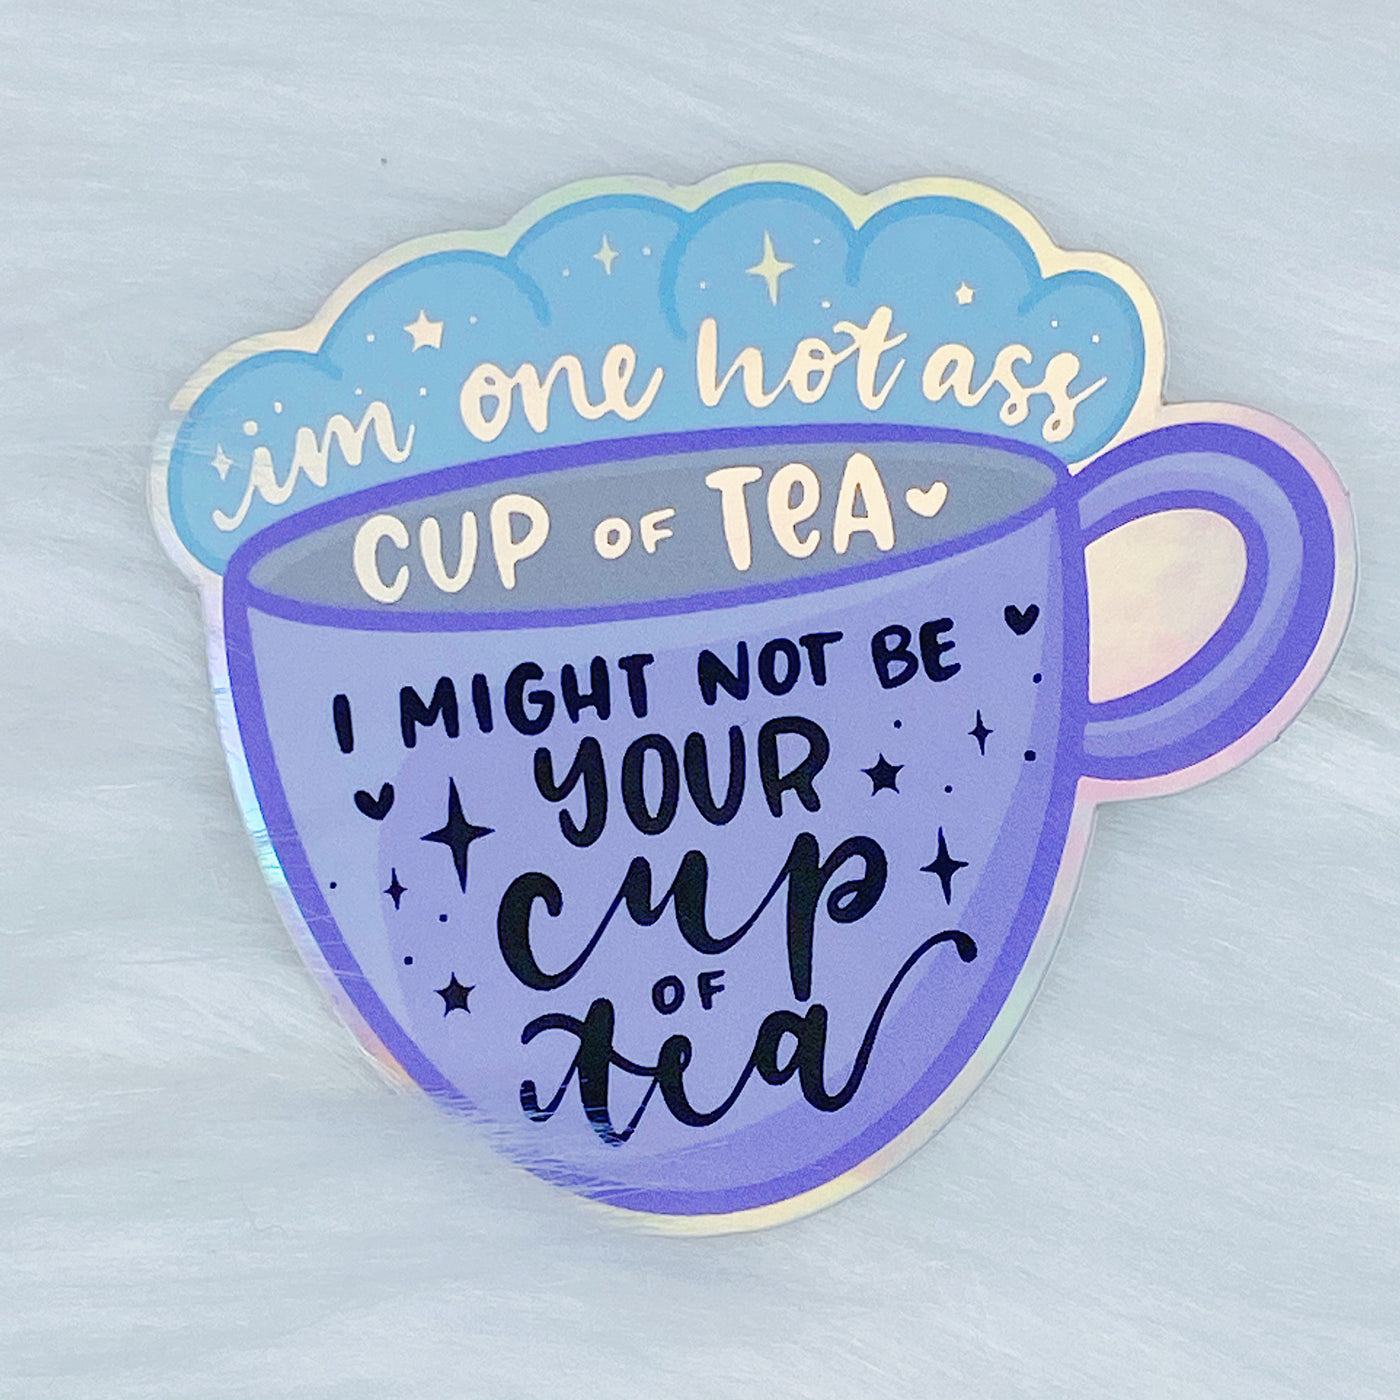 I Might Not Be Your Cup Of Tea [PURPLE] Holographic Vinyl Sticker Die Cut